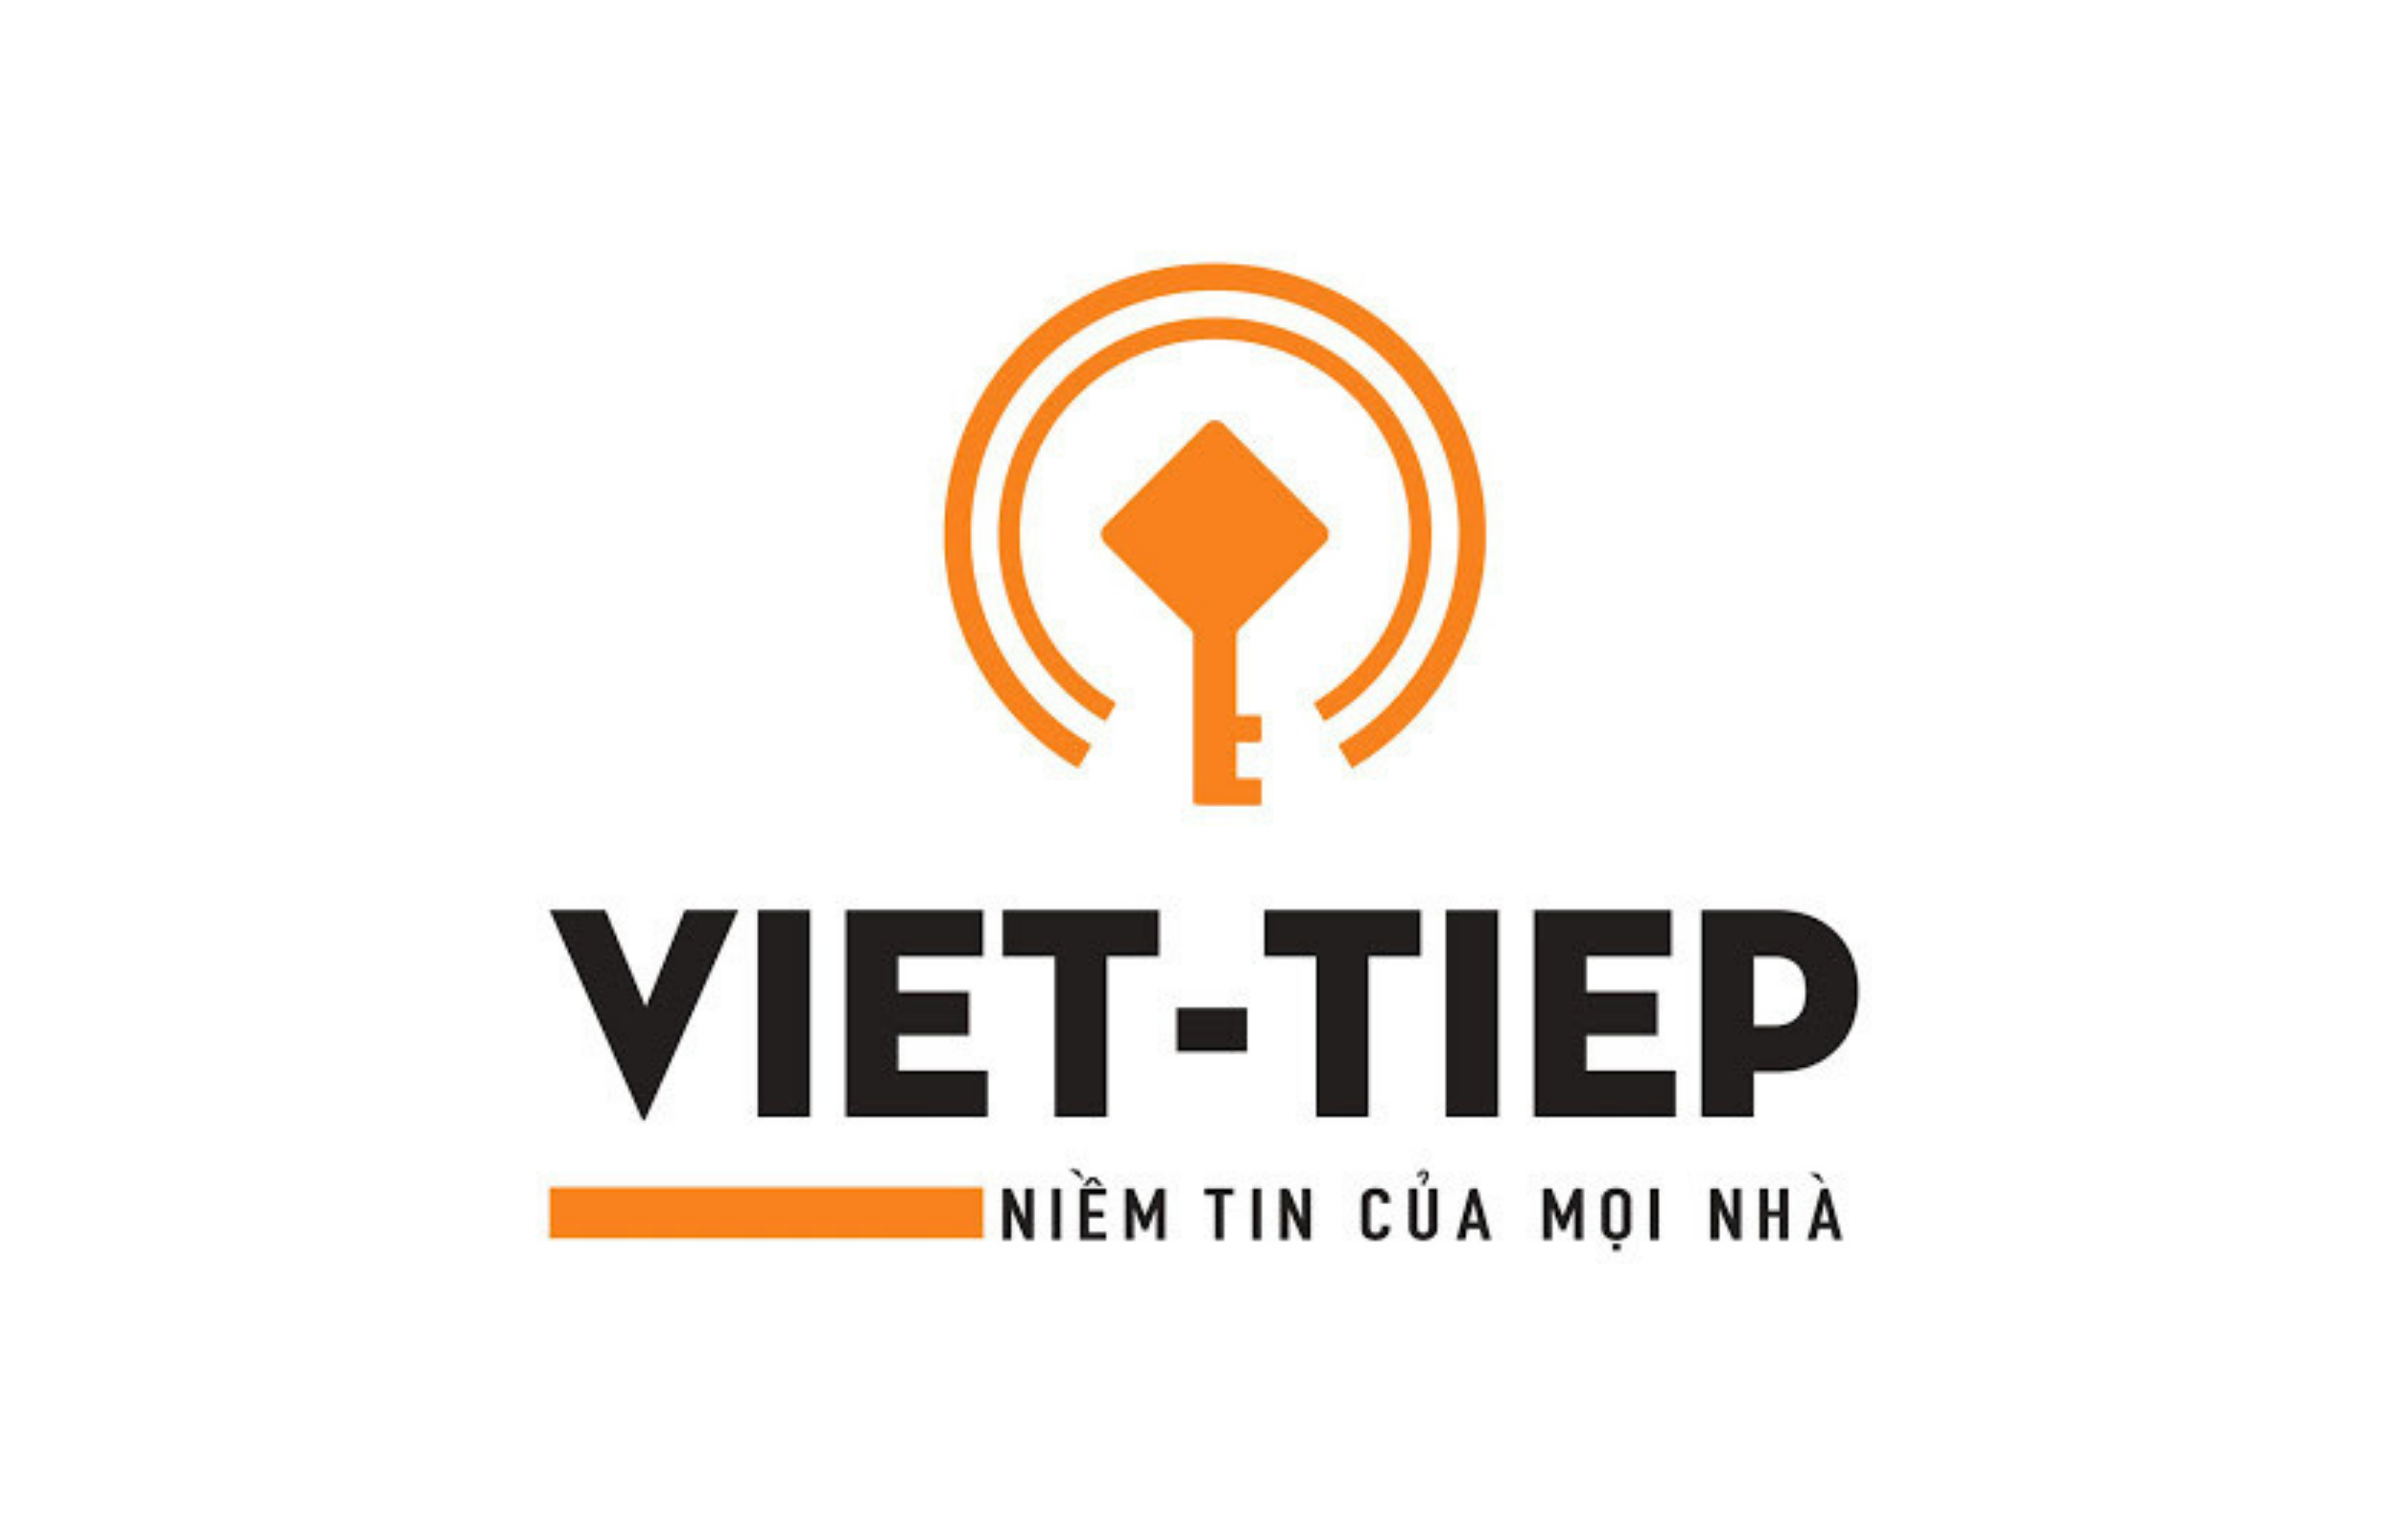 VIỆT TIỆP